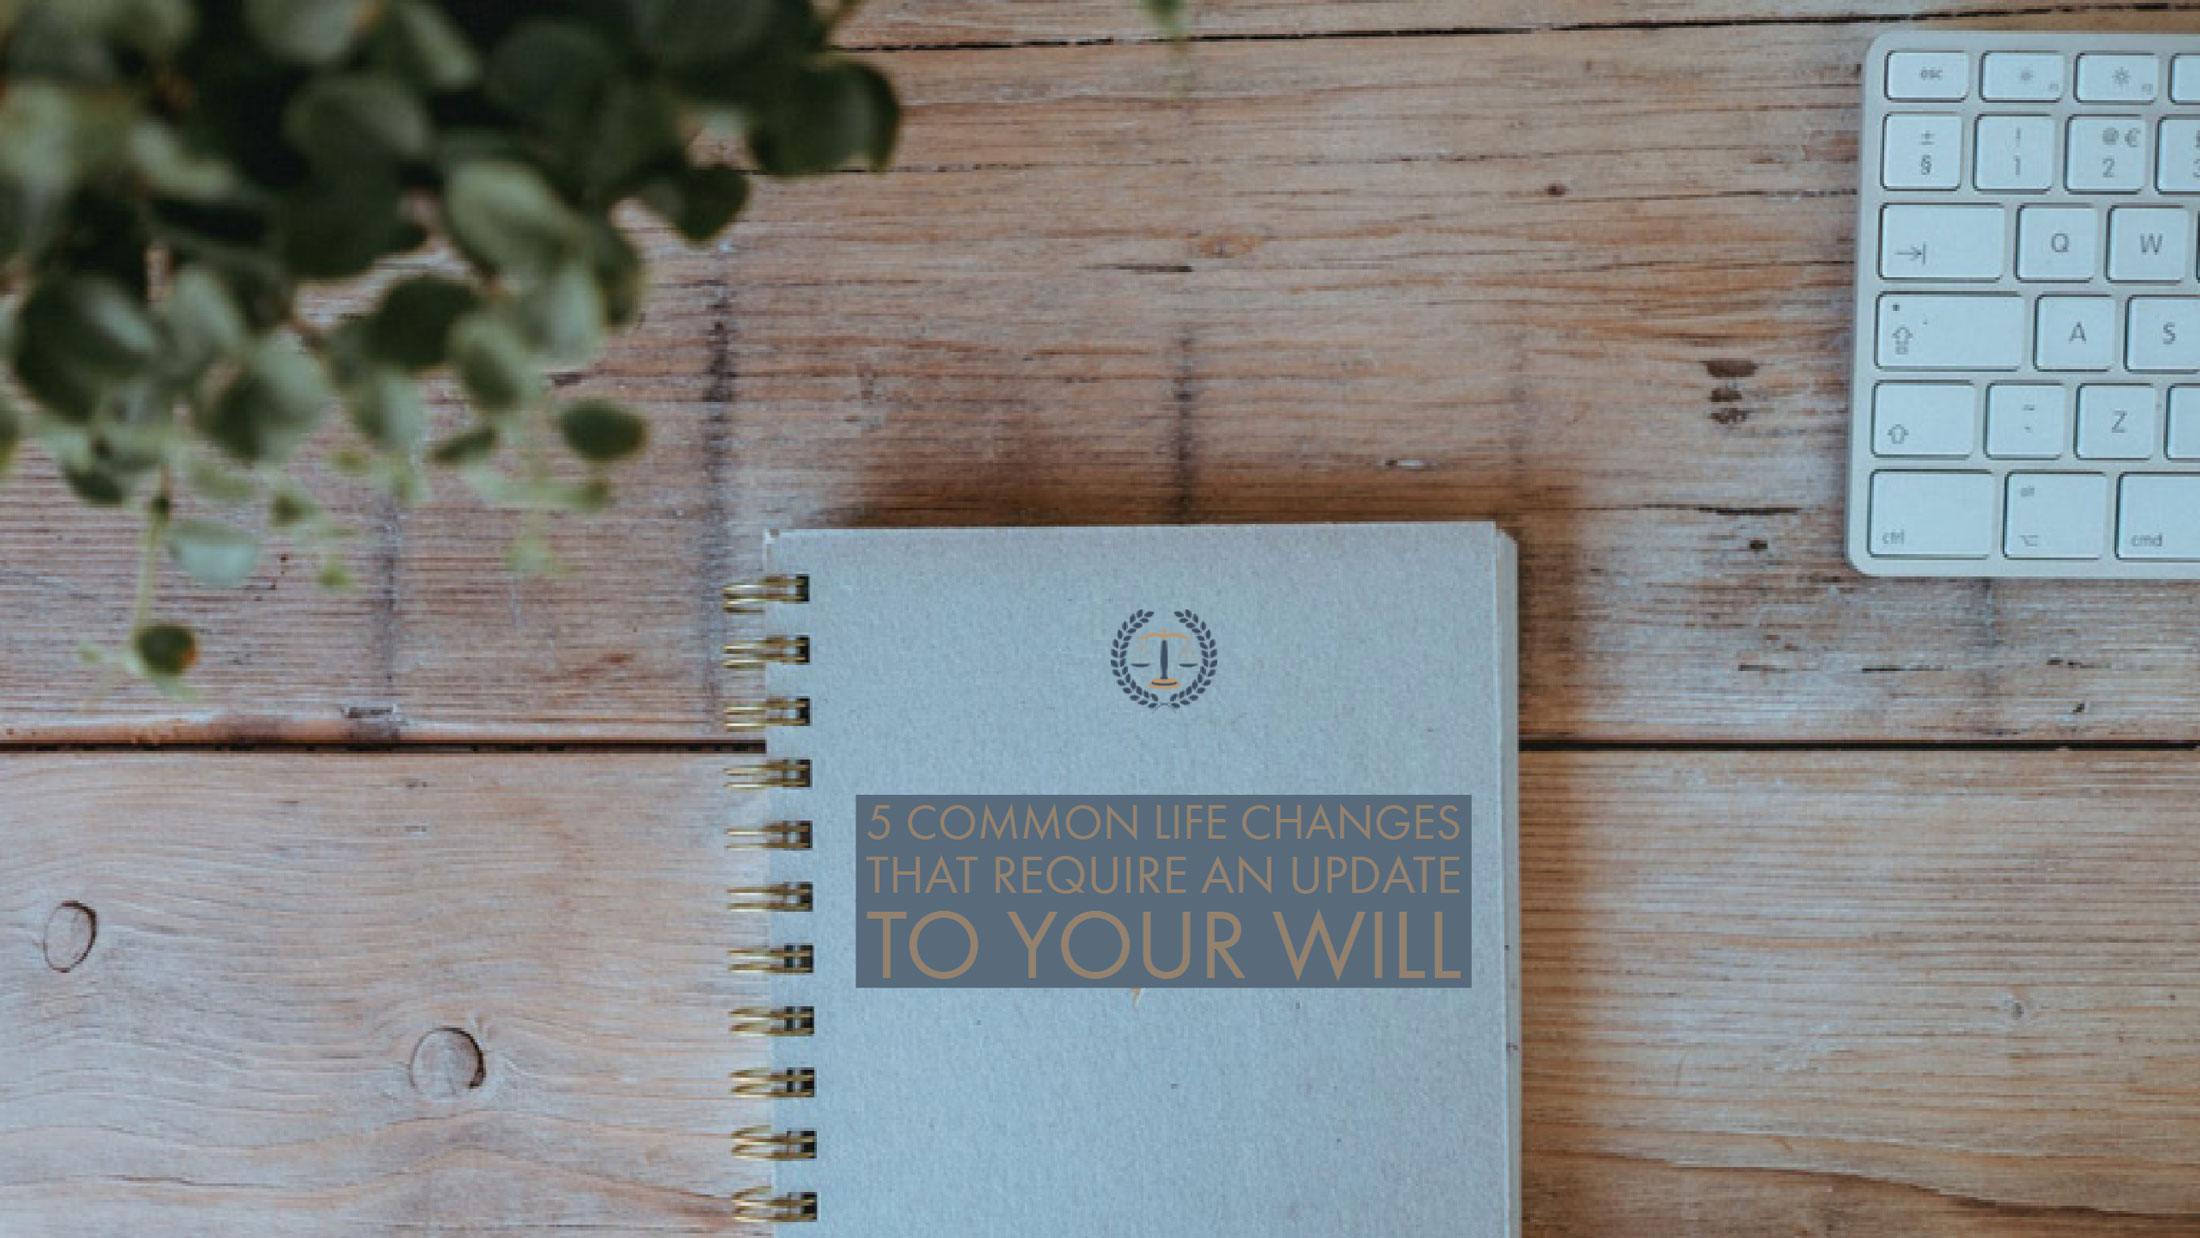 5 COMMON LIFE CHANGES THAT REQUIRE AN UPDATE TO YOUR WILL